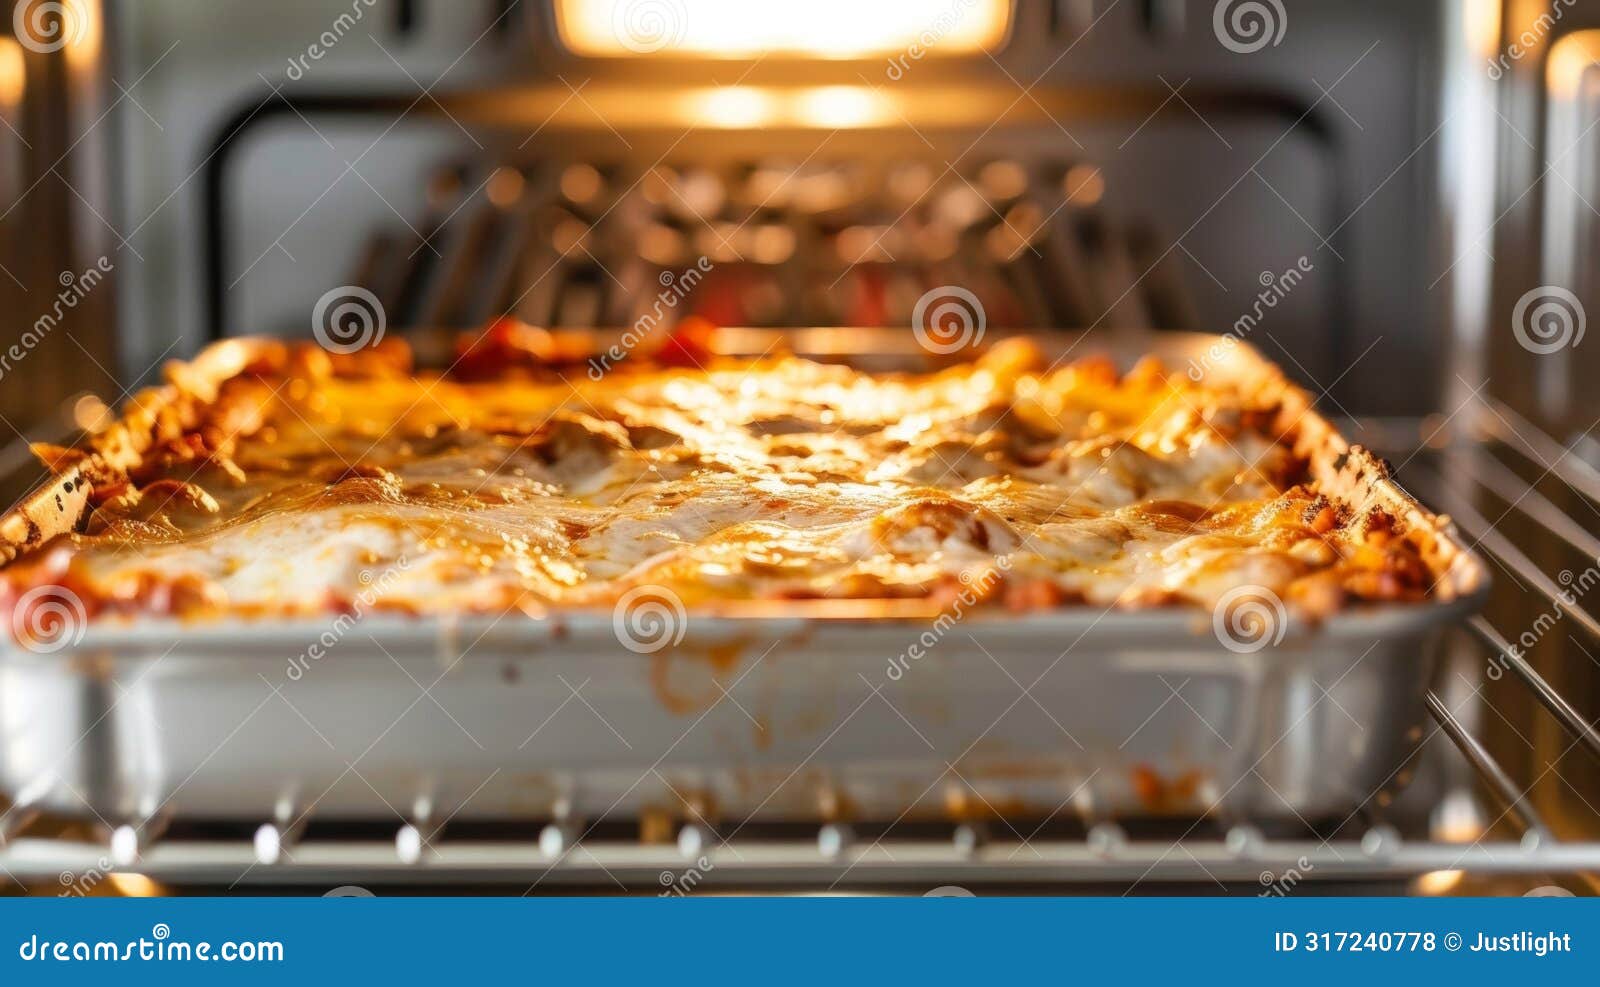 the top heating  of a convection oven browning the top of a cheesy lasagna